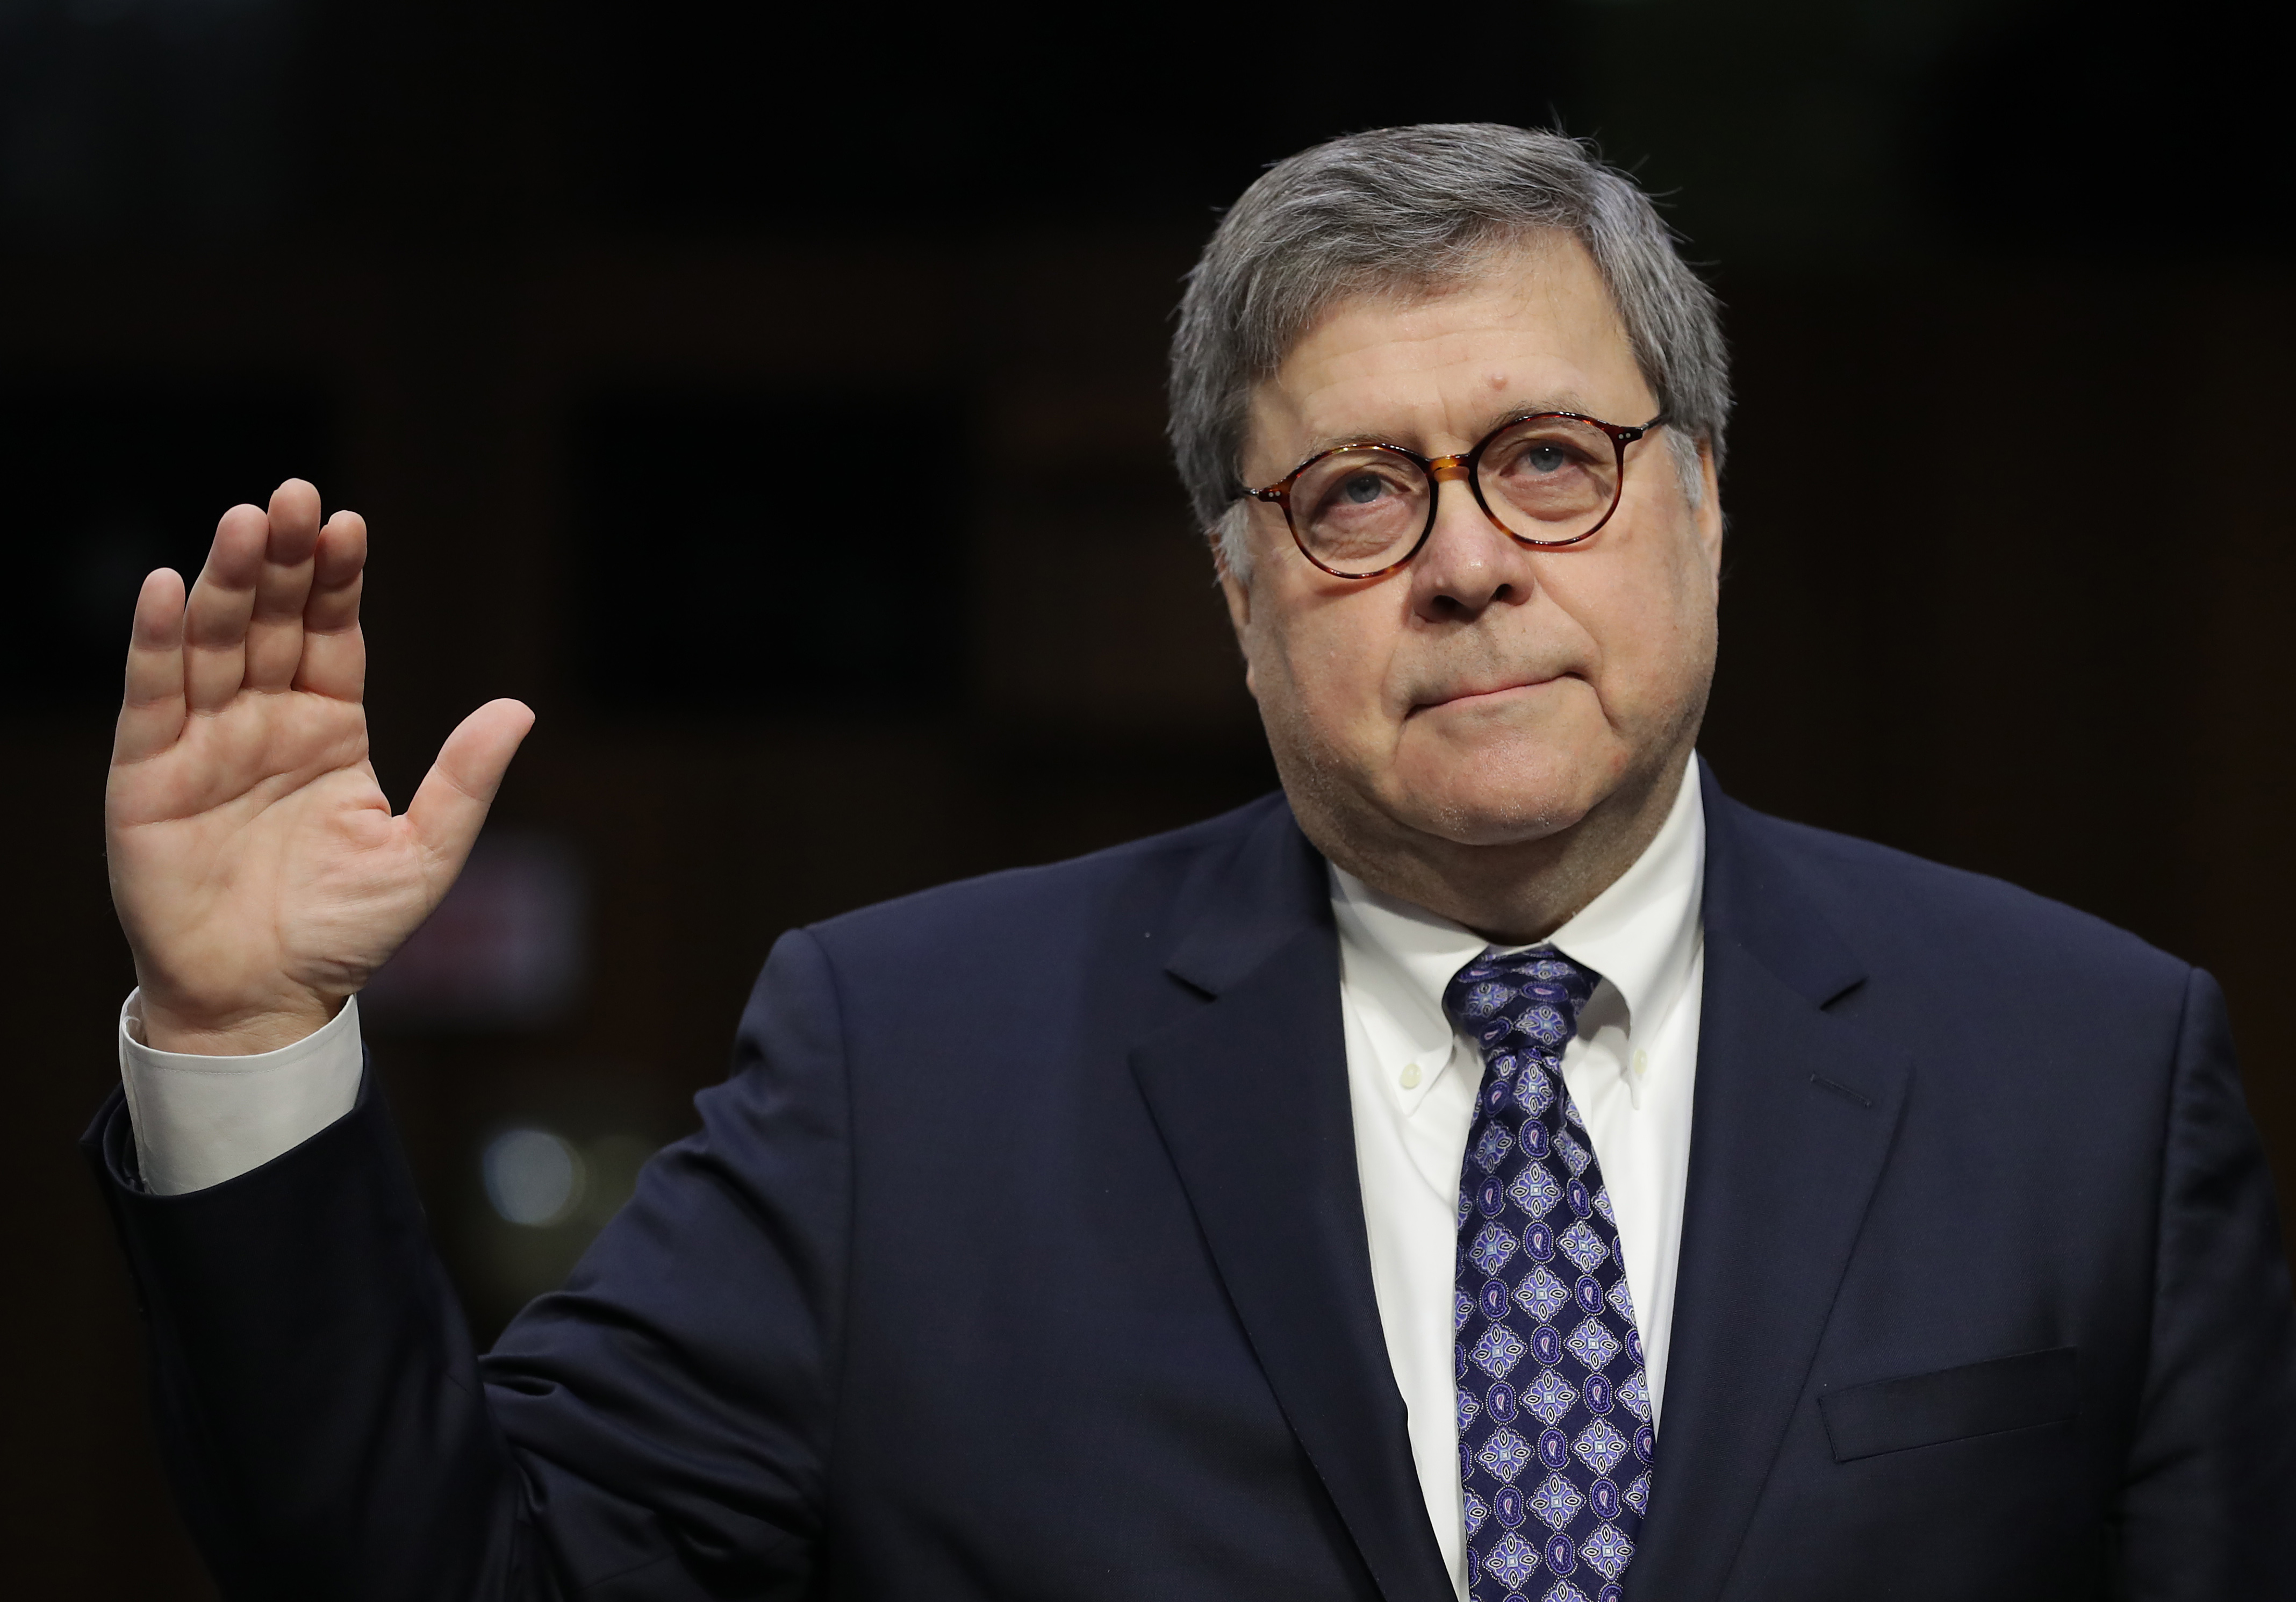 U.S. Attorney General William Barr is sworn in prior to testifying at his confirmation hearing before the Senate Judiciary Committee Jan. 15, 2019 in Washington, DC. (Chip Somodevilla—Getty Images)